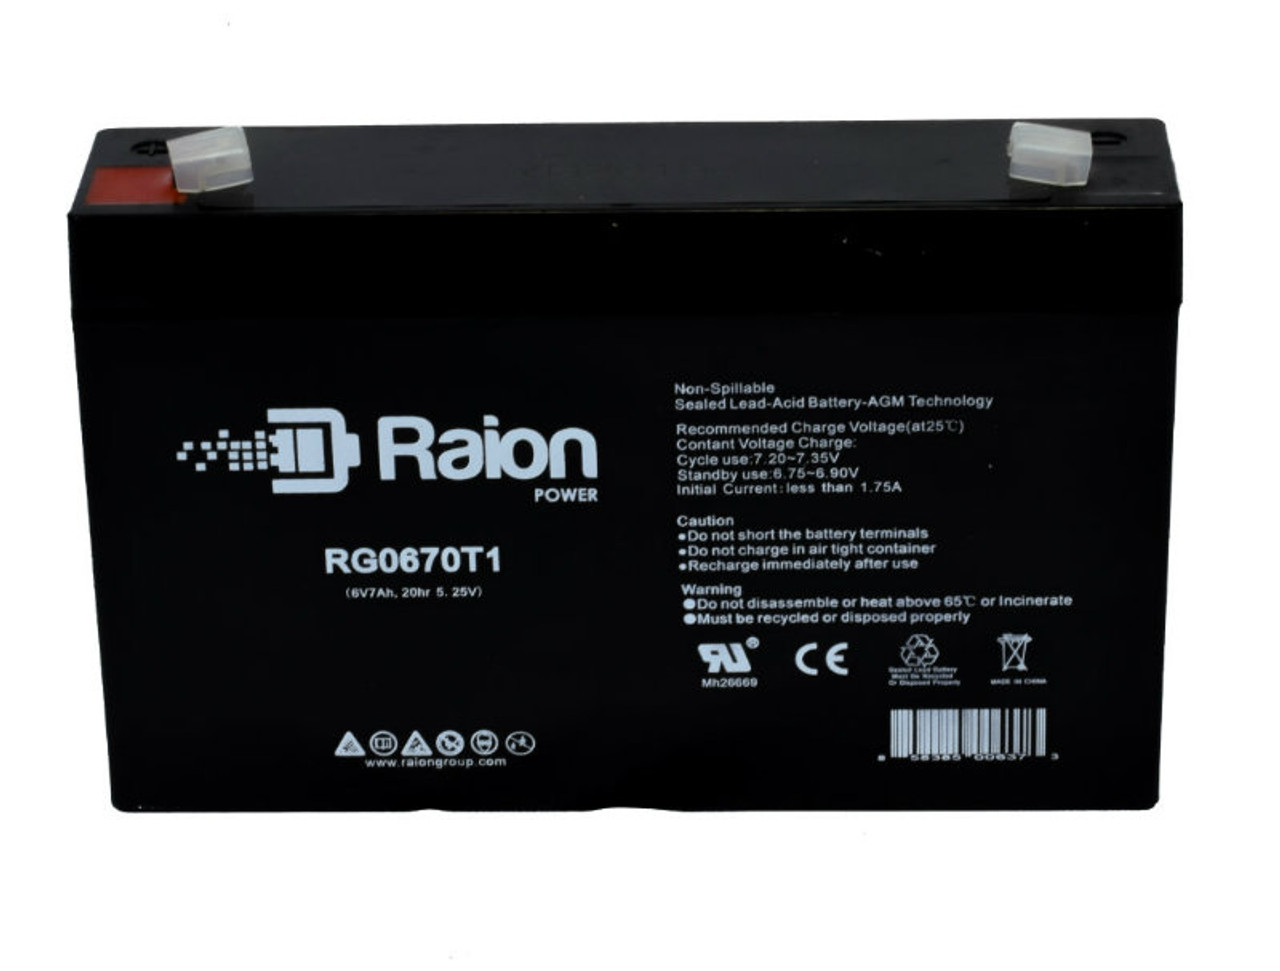 Raion Power RG0670T1 Replacement Battery Cartridge for Pace Tech Vitalmax Systems II